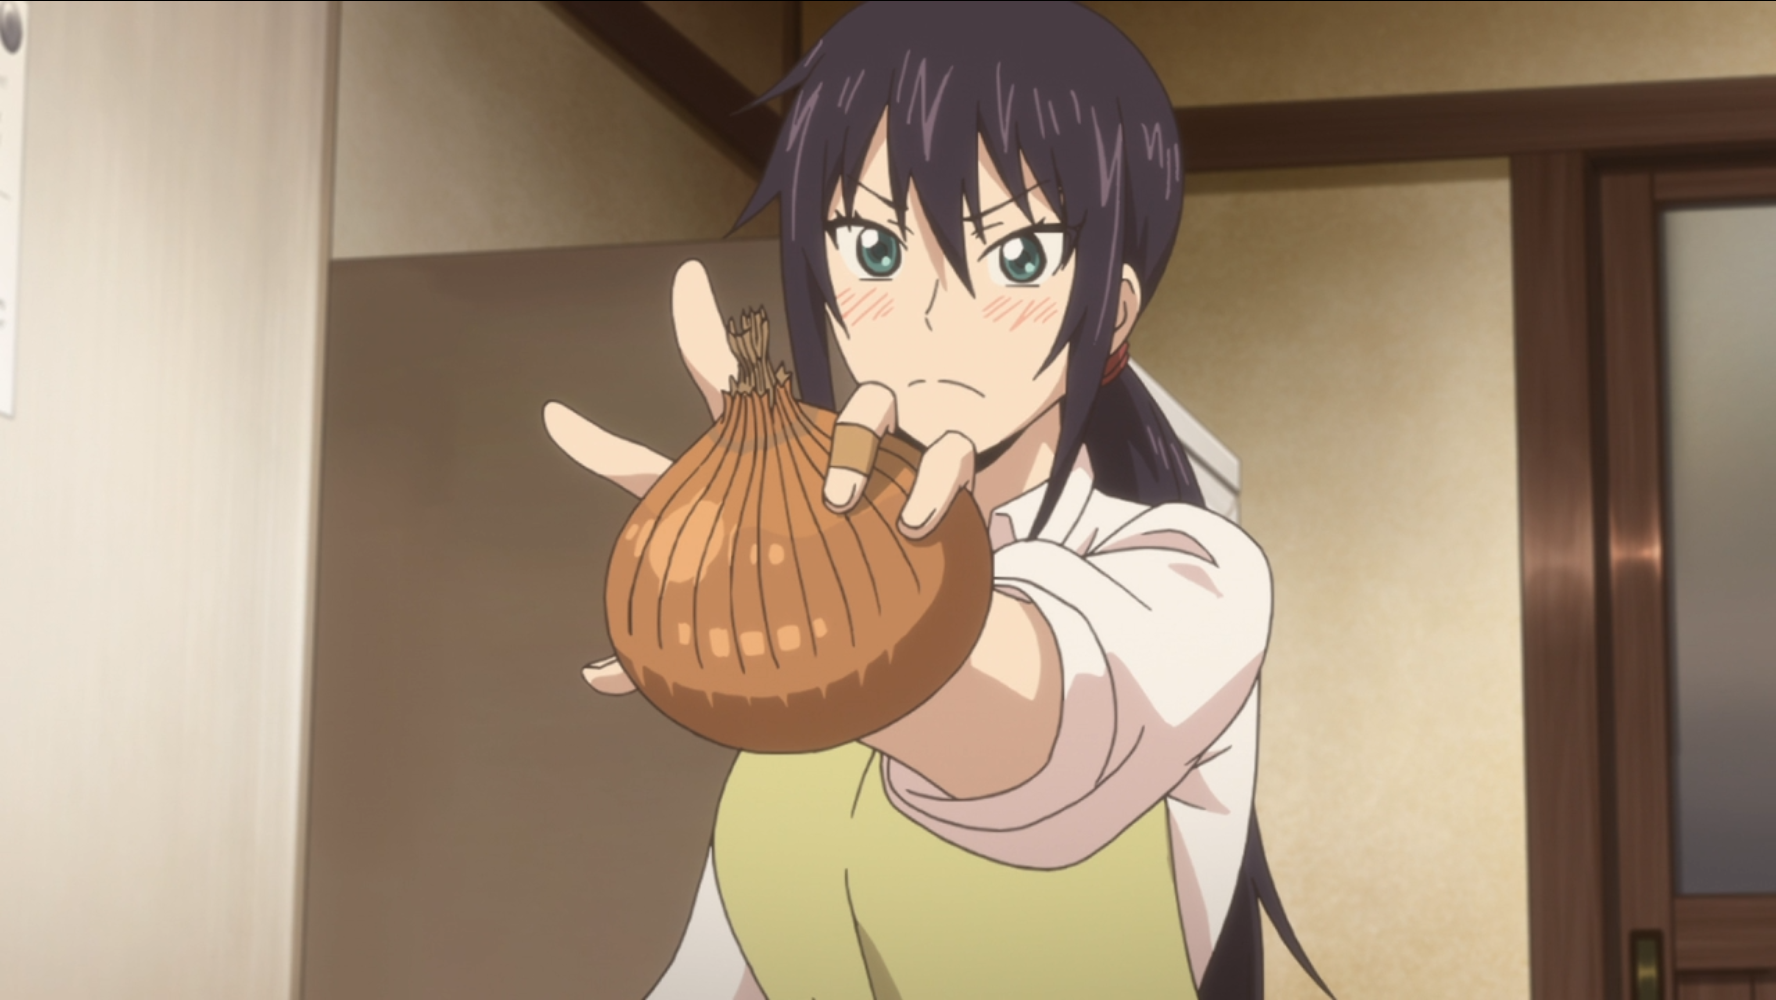 With her bandaged fingers indicating her earlier unsuccessful cooking attempts, Kotori Iida brandishes a large raw onion in a scene from the 2016 sweetness & lightning TV anime.